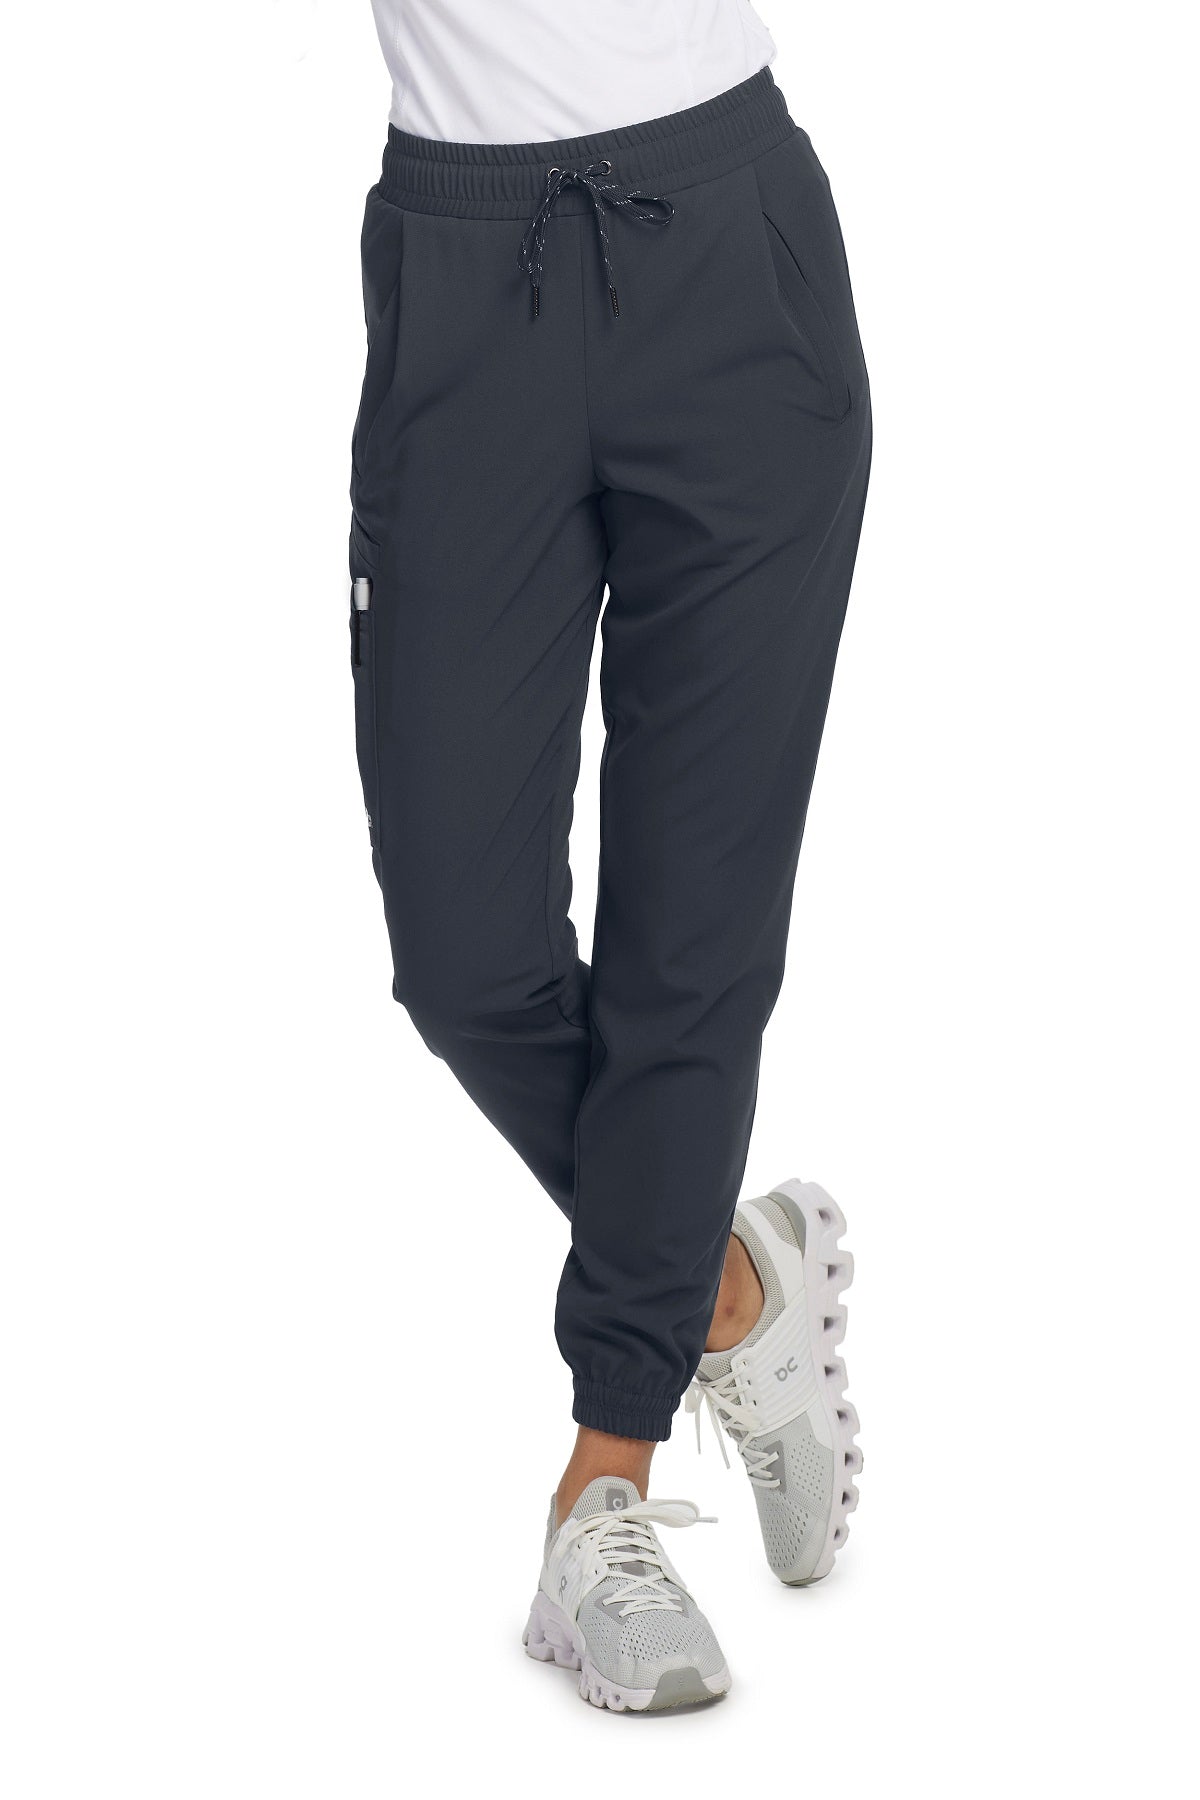 Barco Unify Scrub Pants Mission Jogger Petite Length in Steel at Parker's Clothing and Shoes.